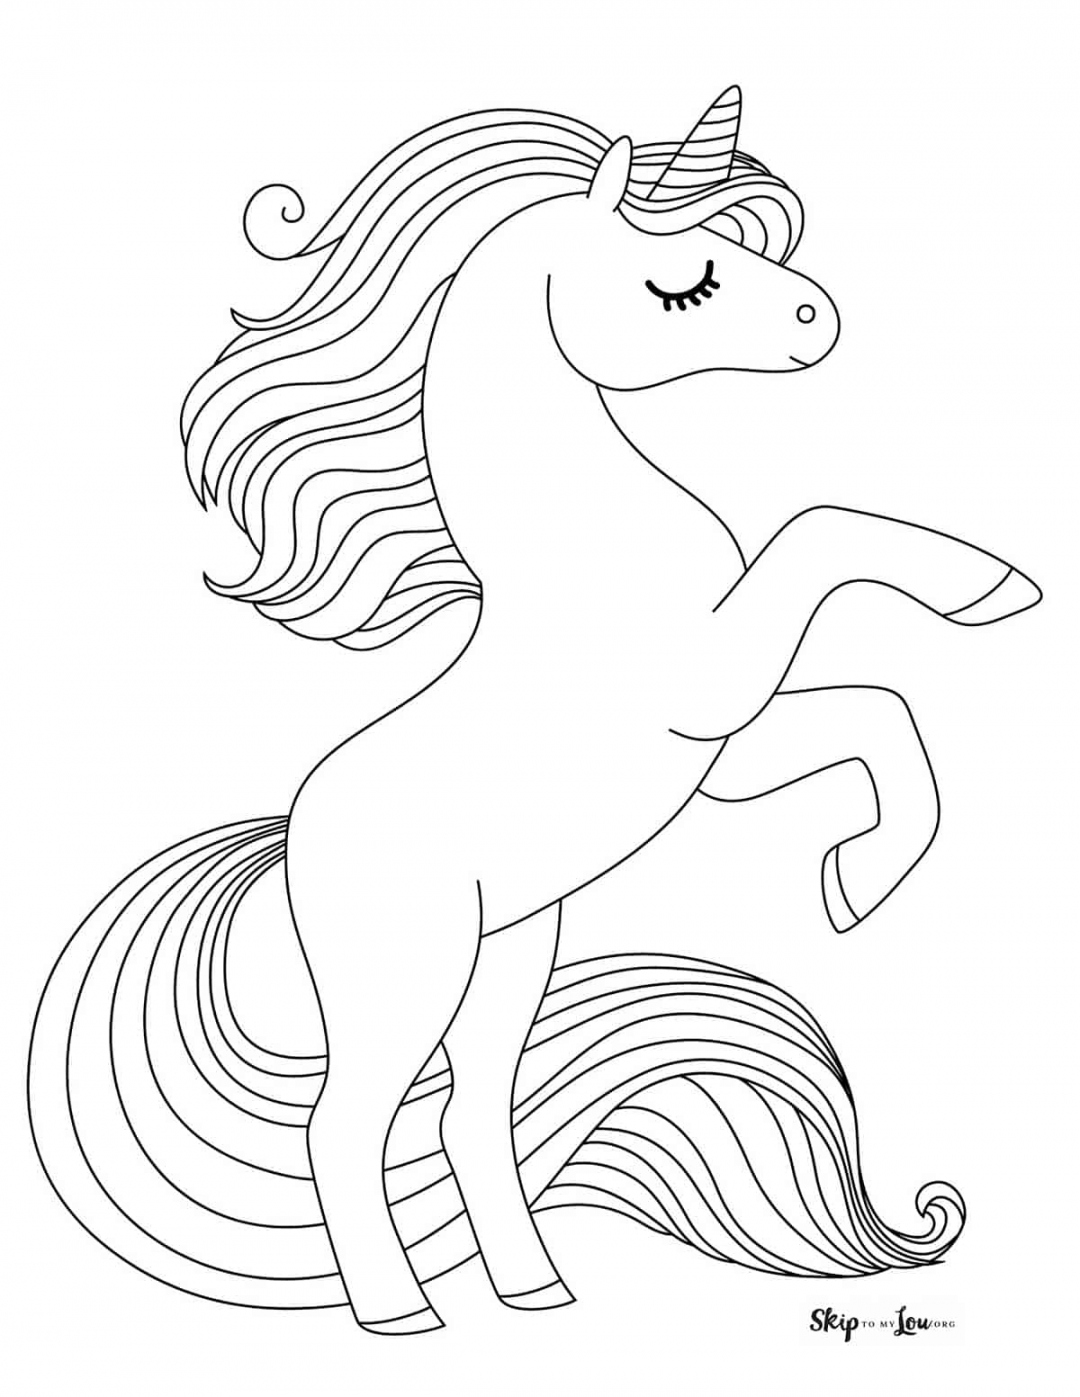 Free Printable Unicorn Coloring Pages - Printable -  Magical Unicorn Coloring Pages Print for Free  Skip To My Lou